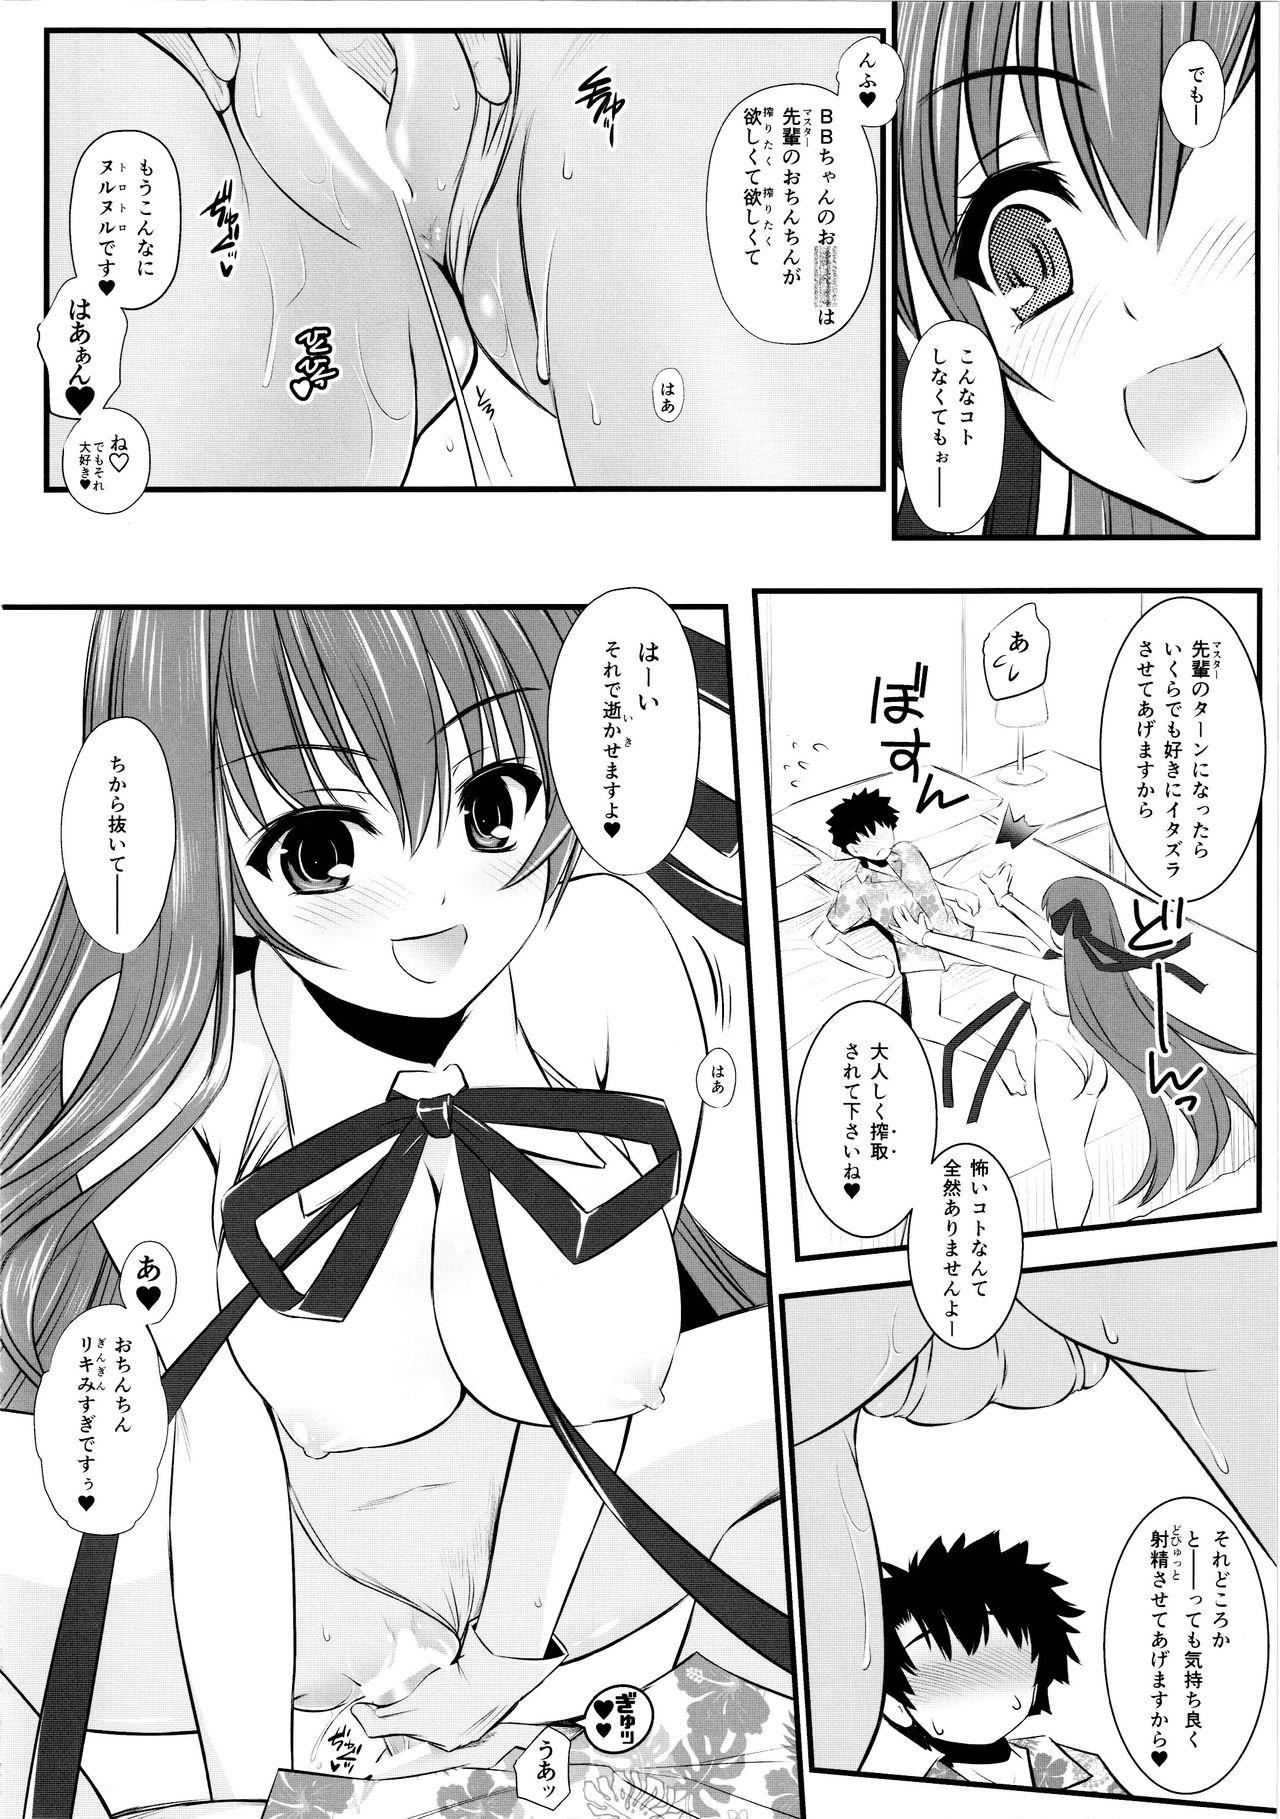 Breast (C96) [Yakan Honpo (Inoue Tommy)] Queen [Kyuuin] BB-chan (Fate/Grand Order) - Fate grand order Butt Fuck - Page 8